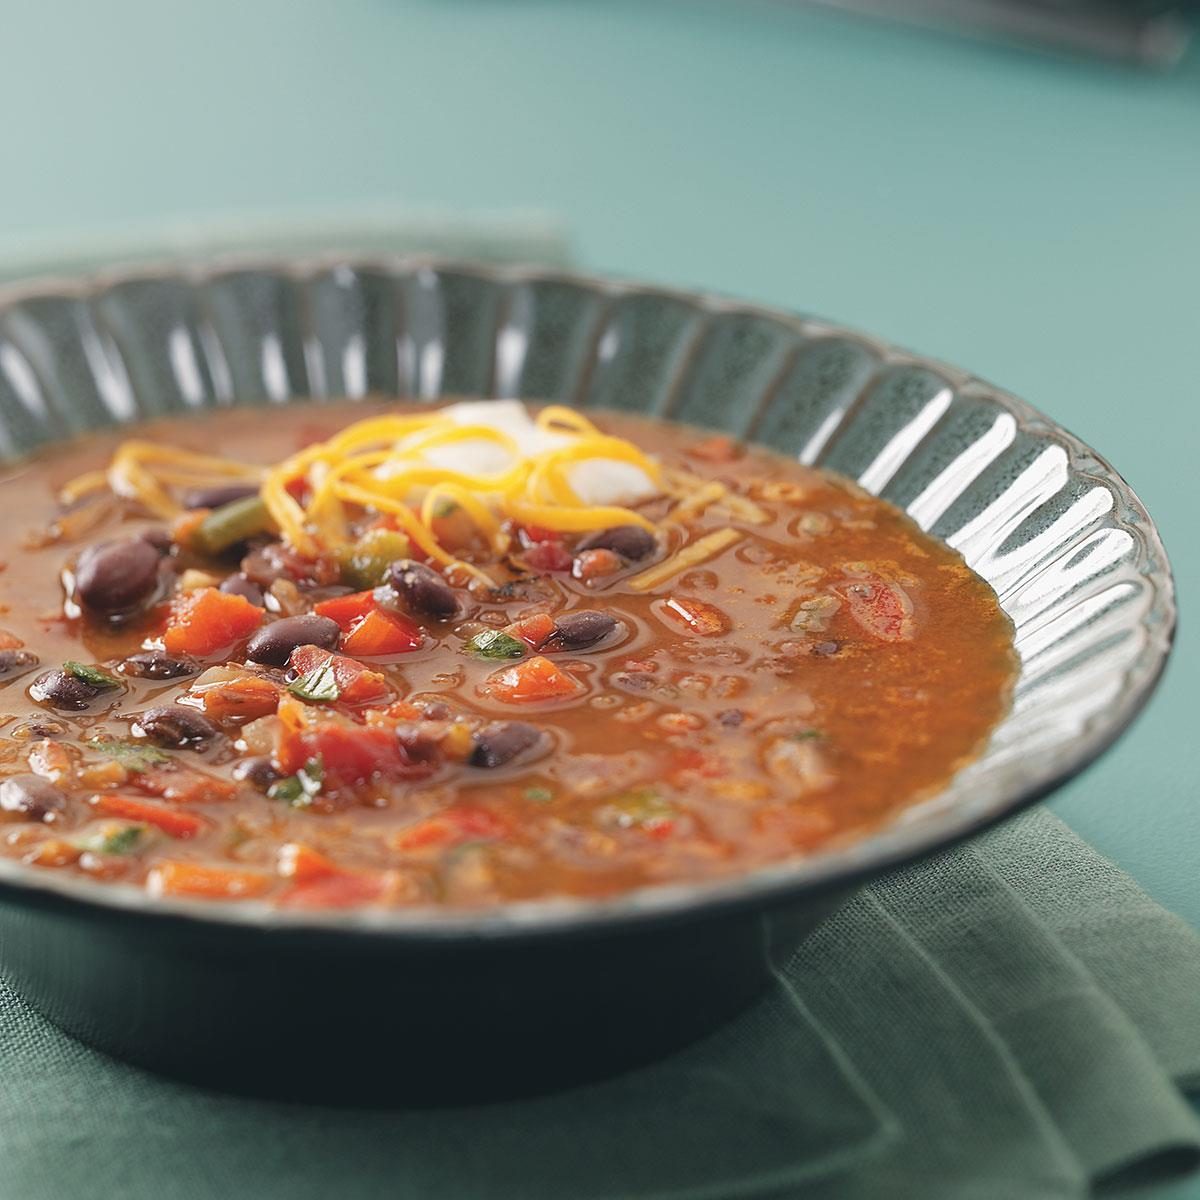 Spicy Black Bean Soup Recipe: How to Make It | Taste of Home